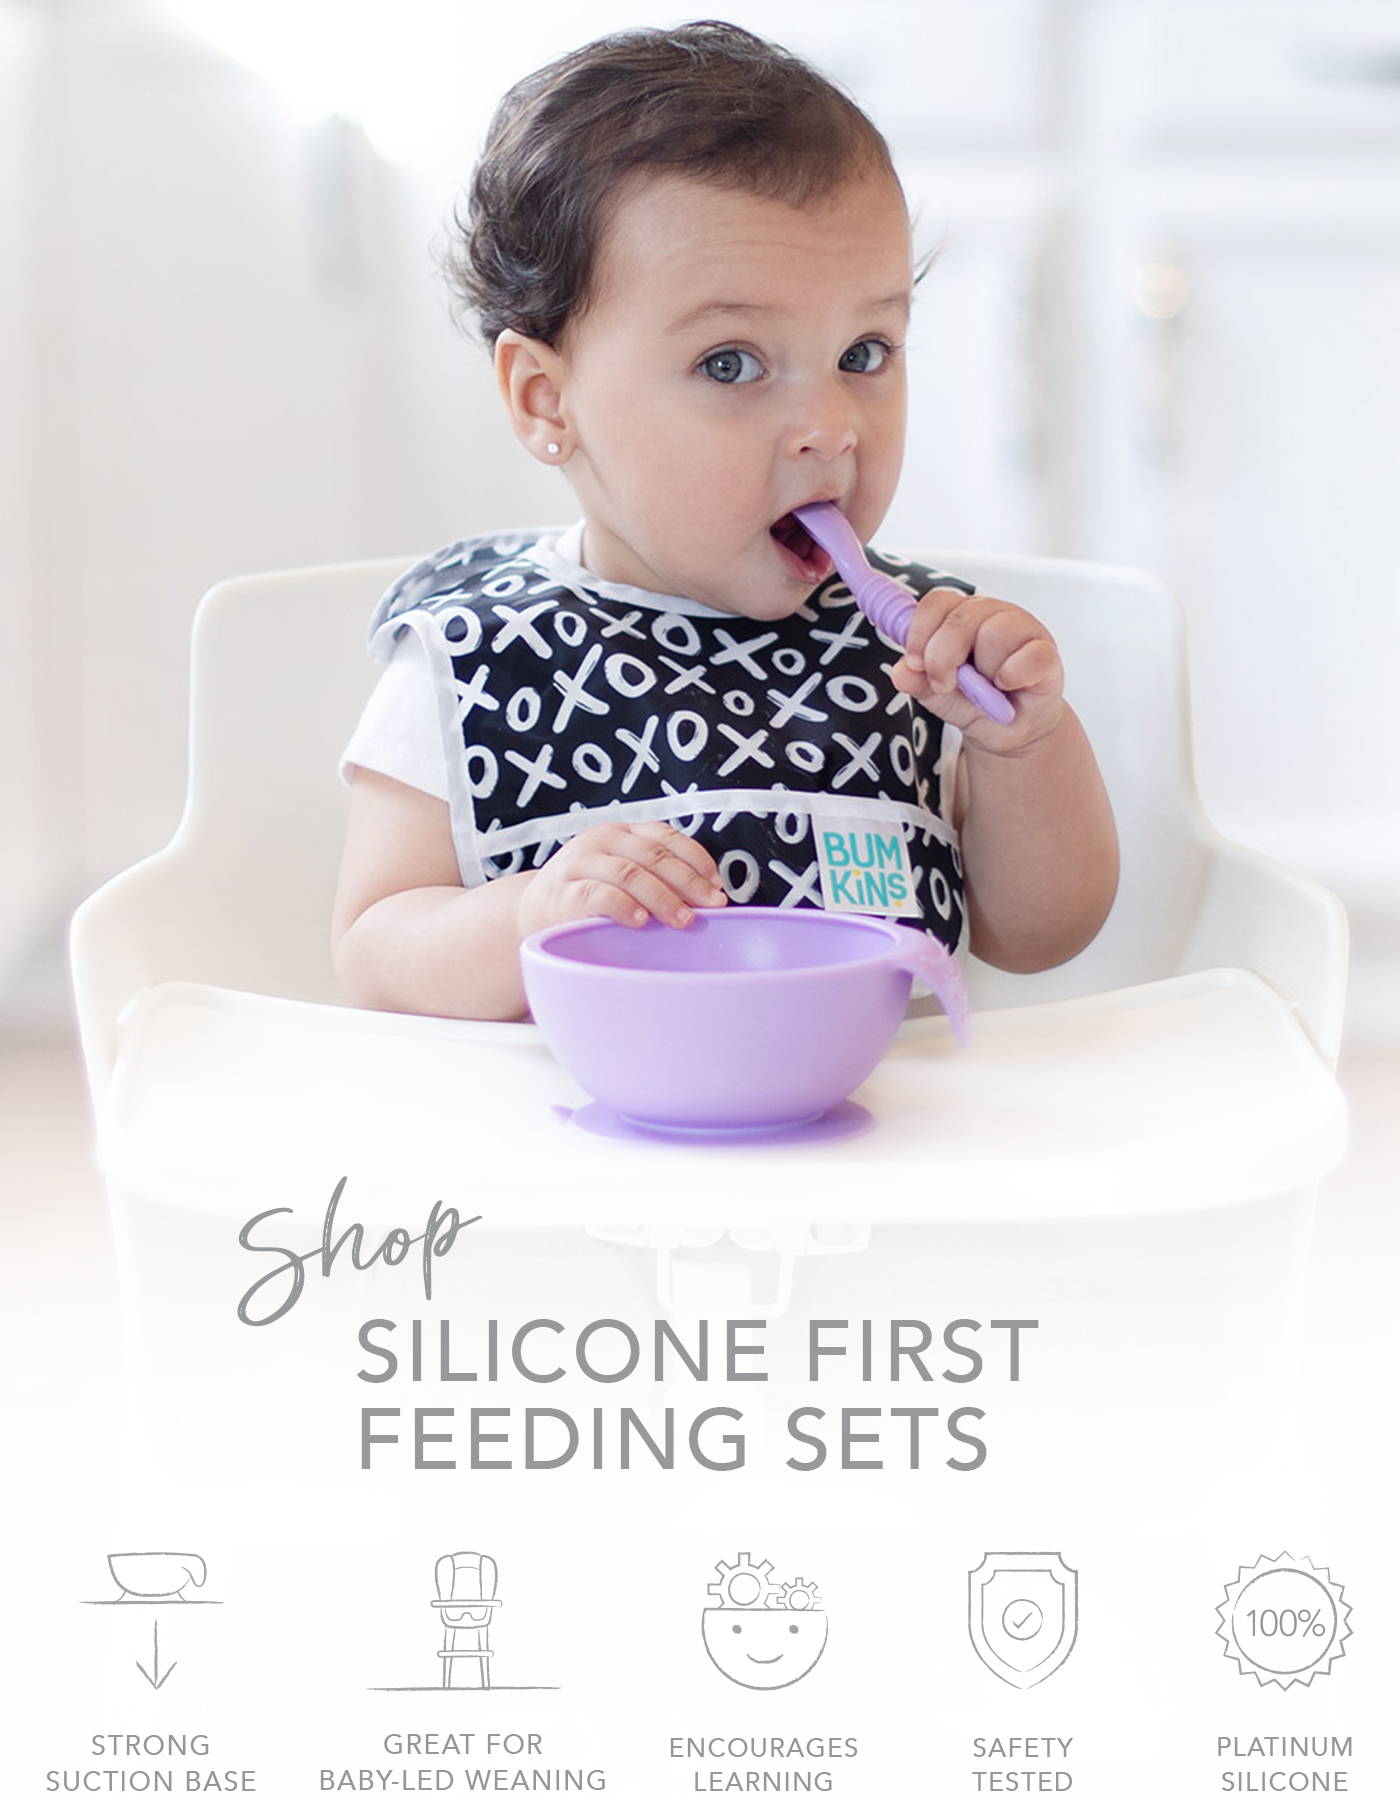 shop silicone first feeding sets, strong suction base, great for baby-led weaning, encourages learning, safety tested, platinum silicone